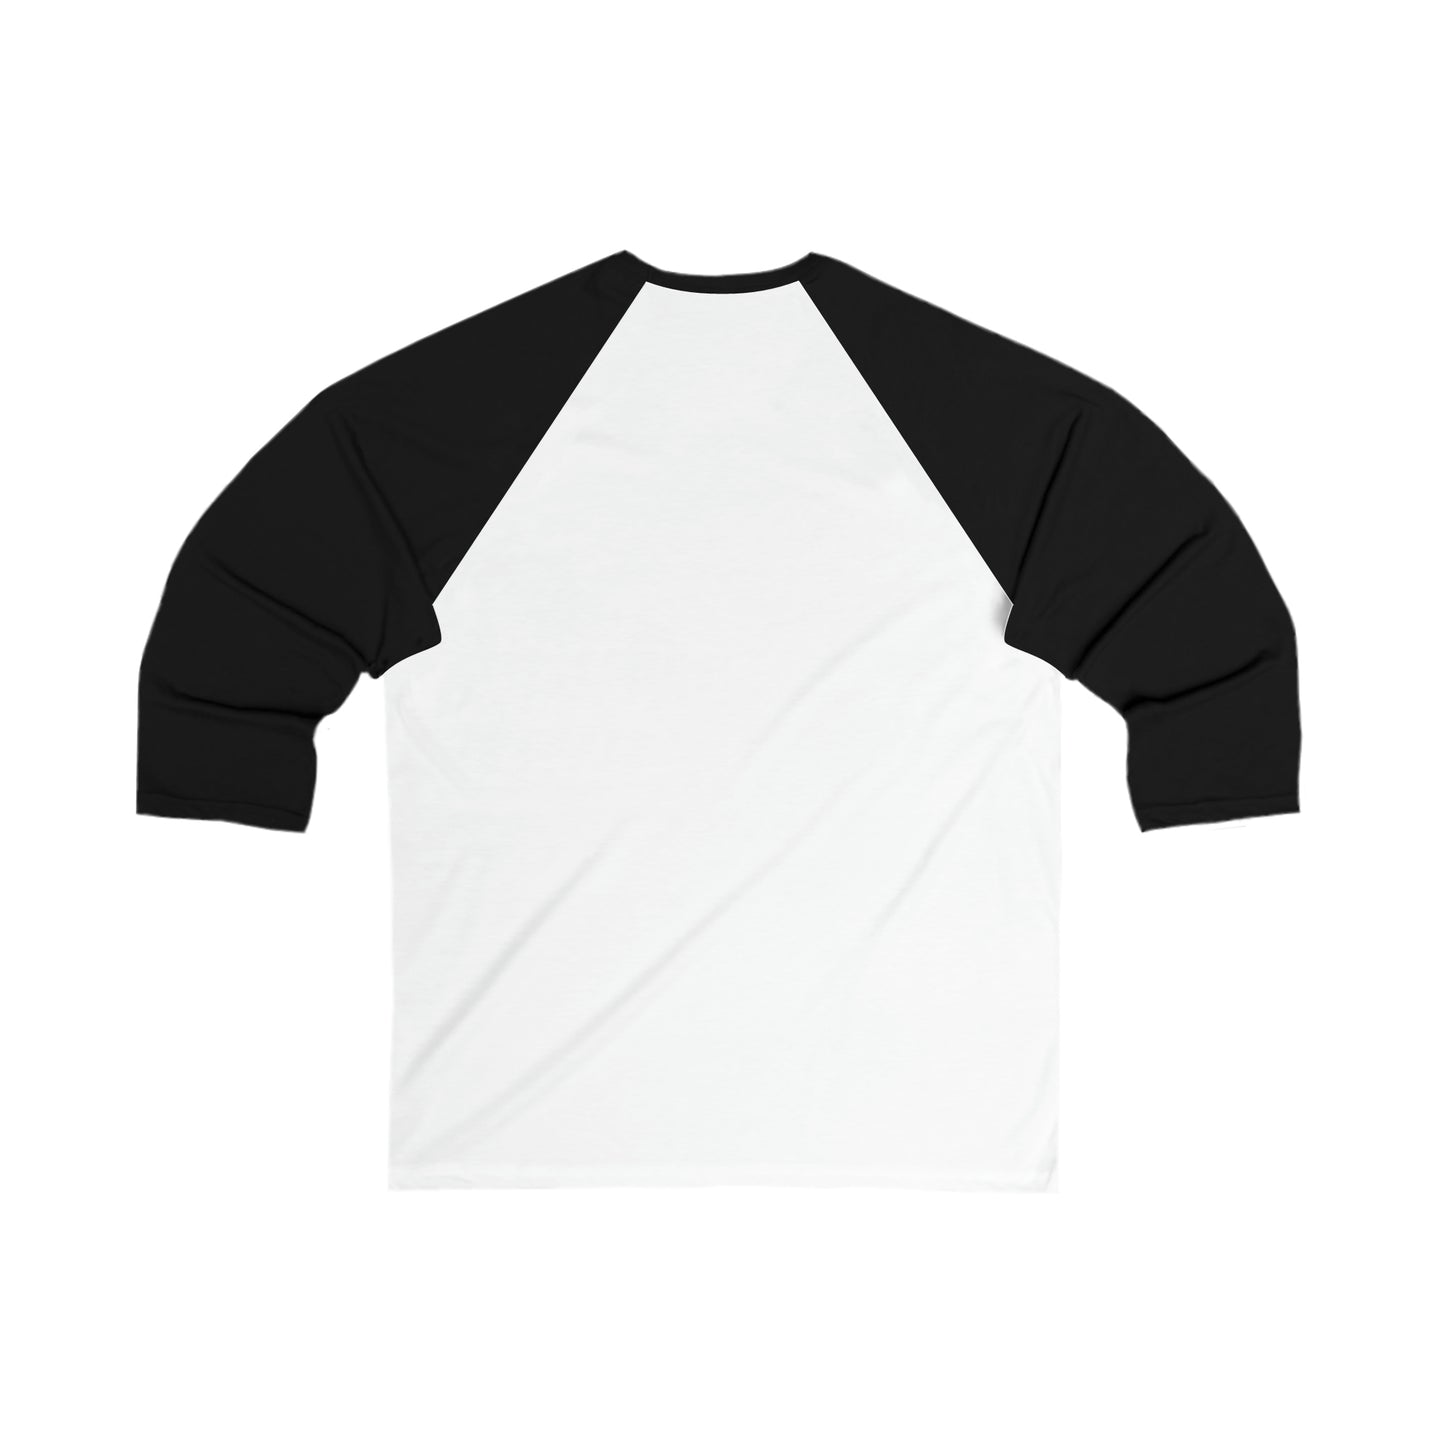 Bunny Thieves Barely There Baseball Tee